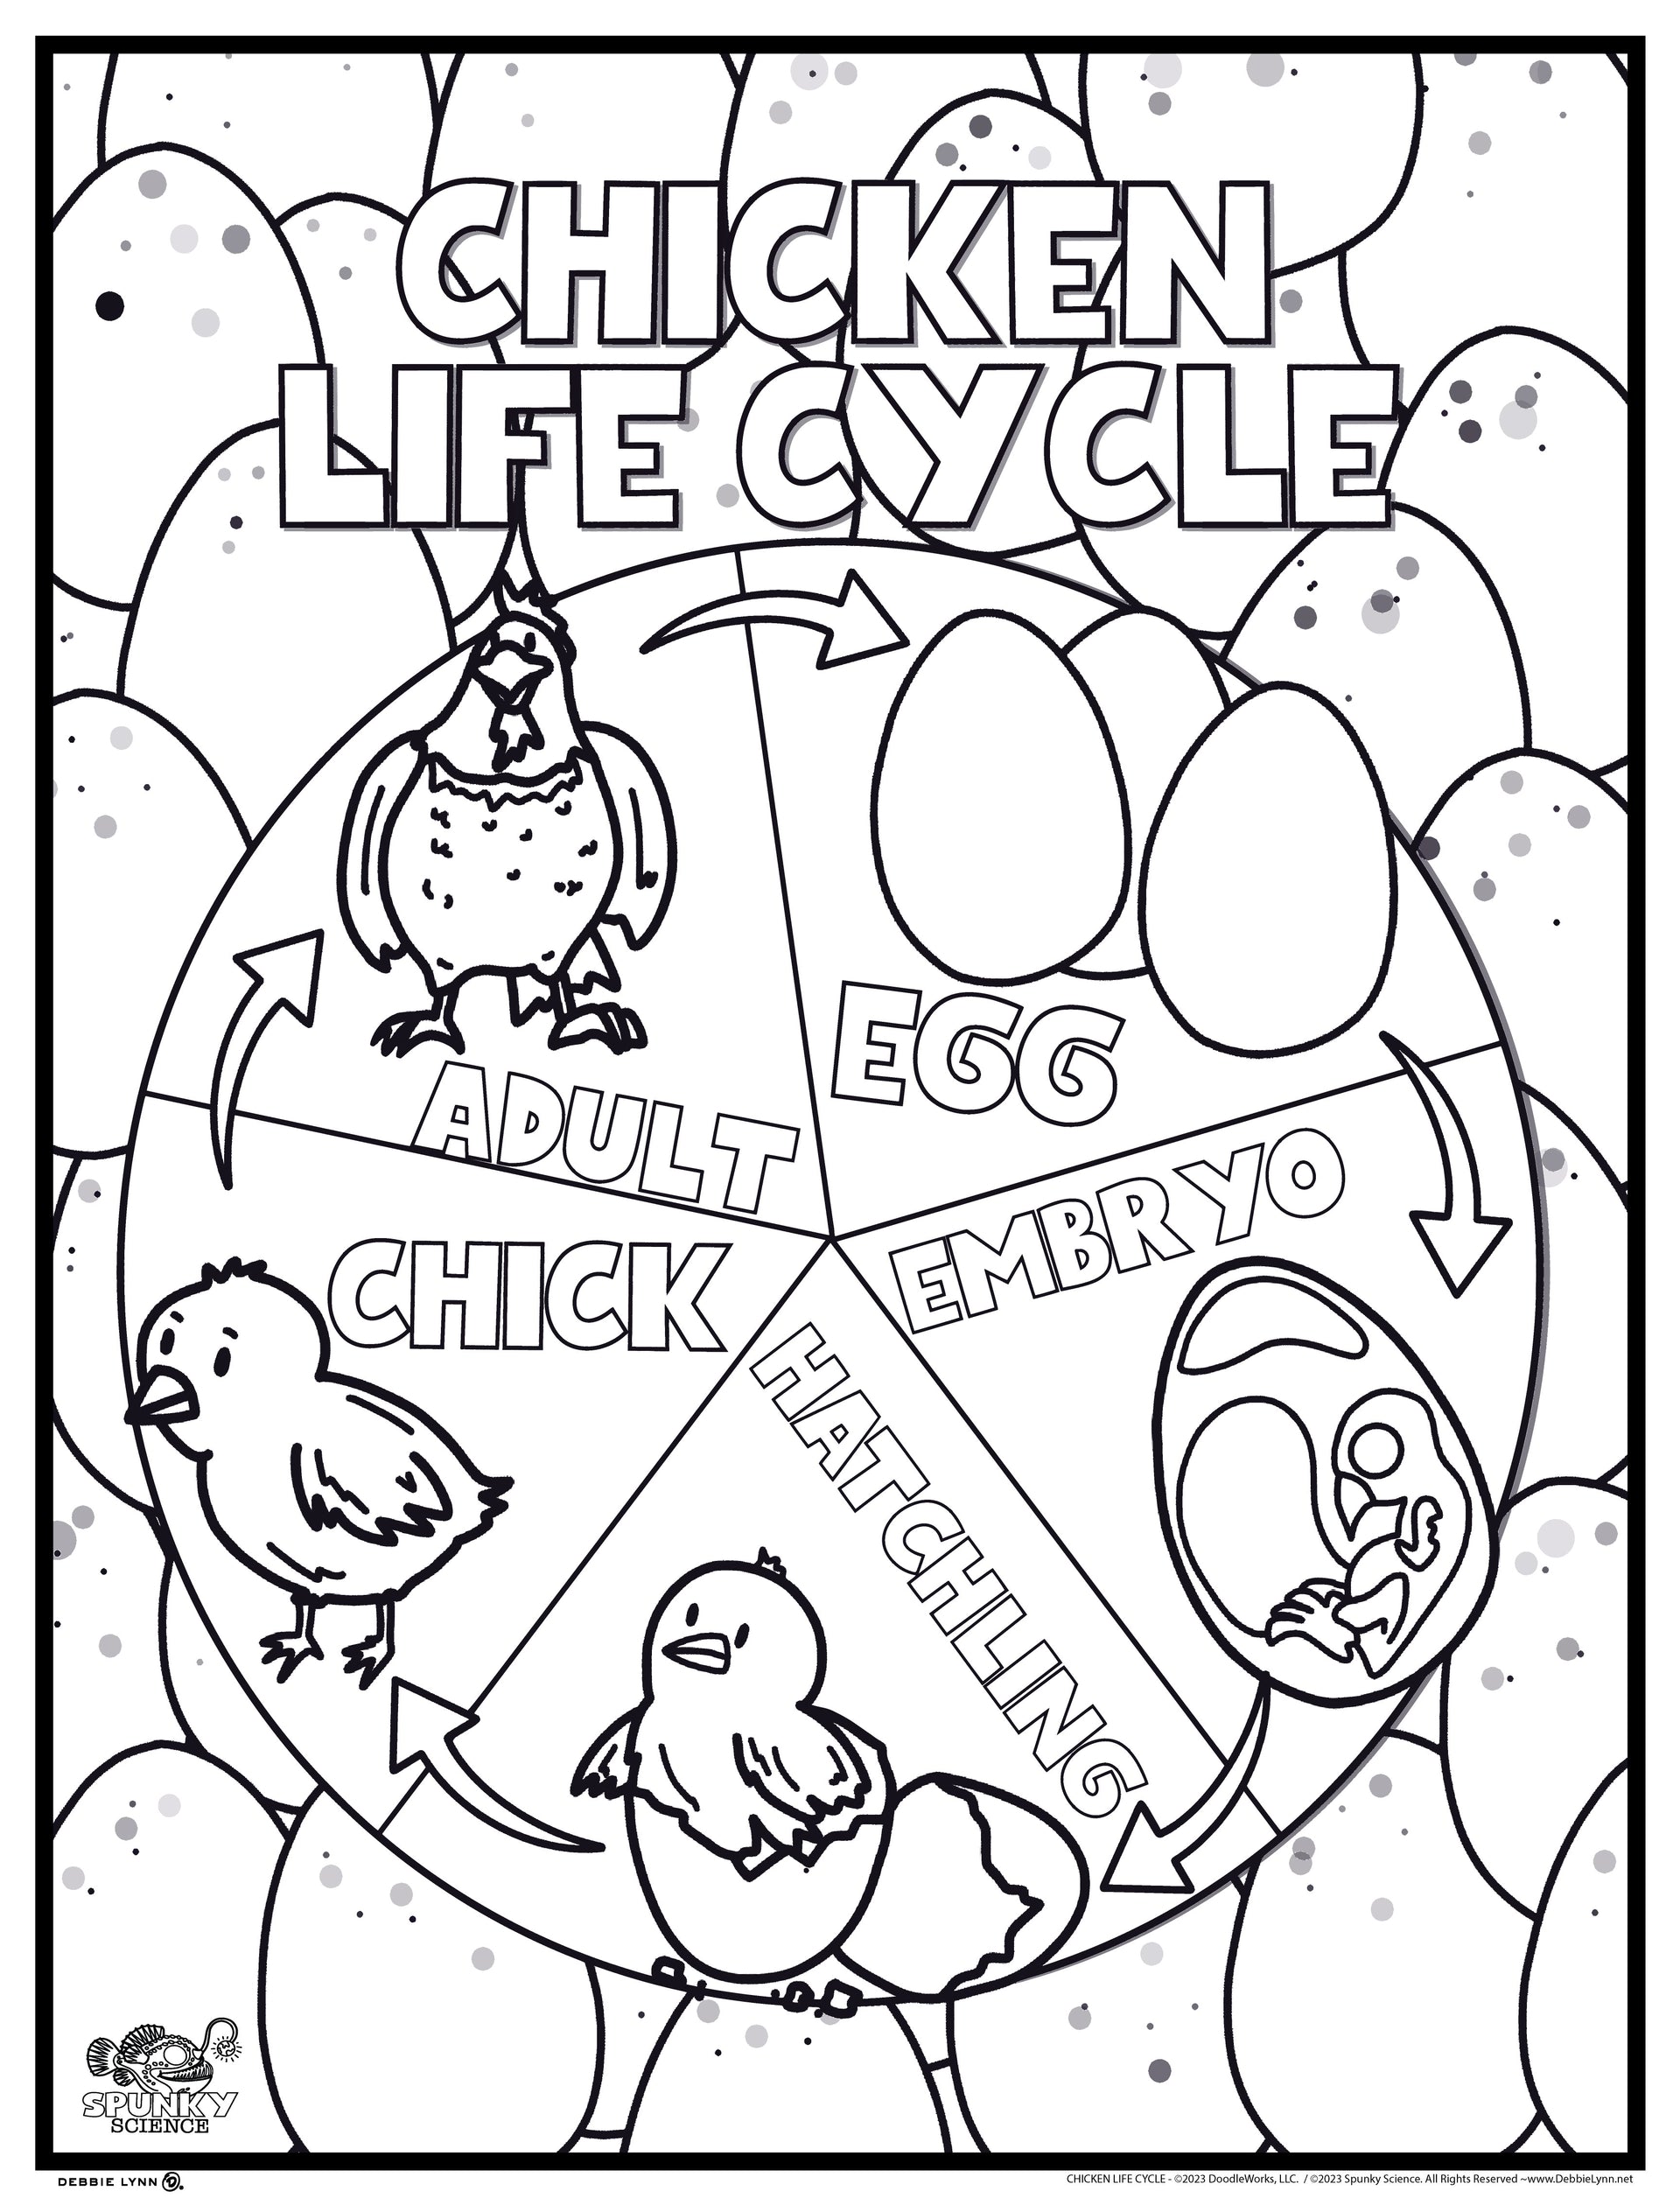 Chicken life cycle spunky science personalized giant coloring poster â debbie lynn